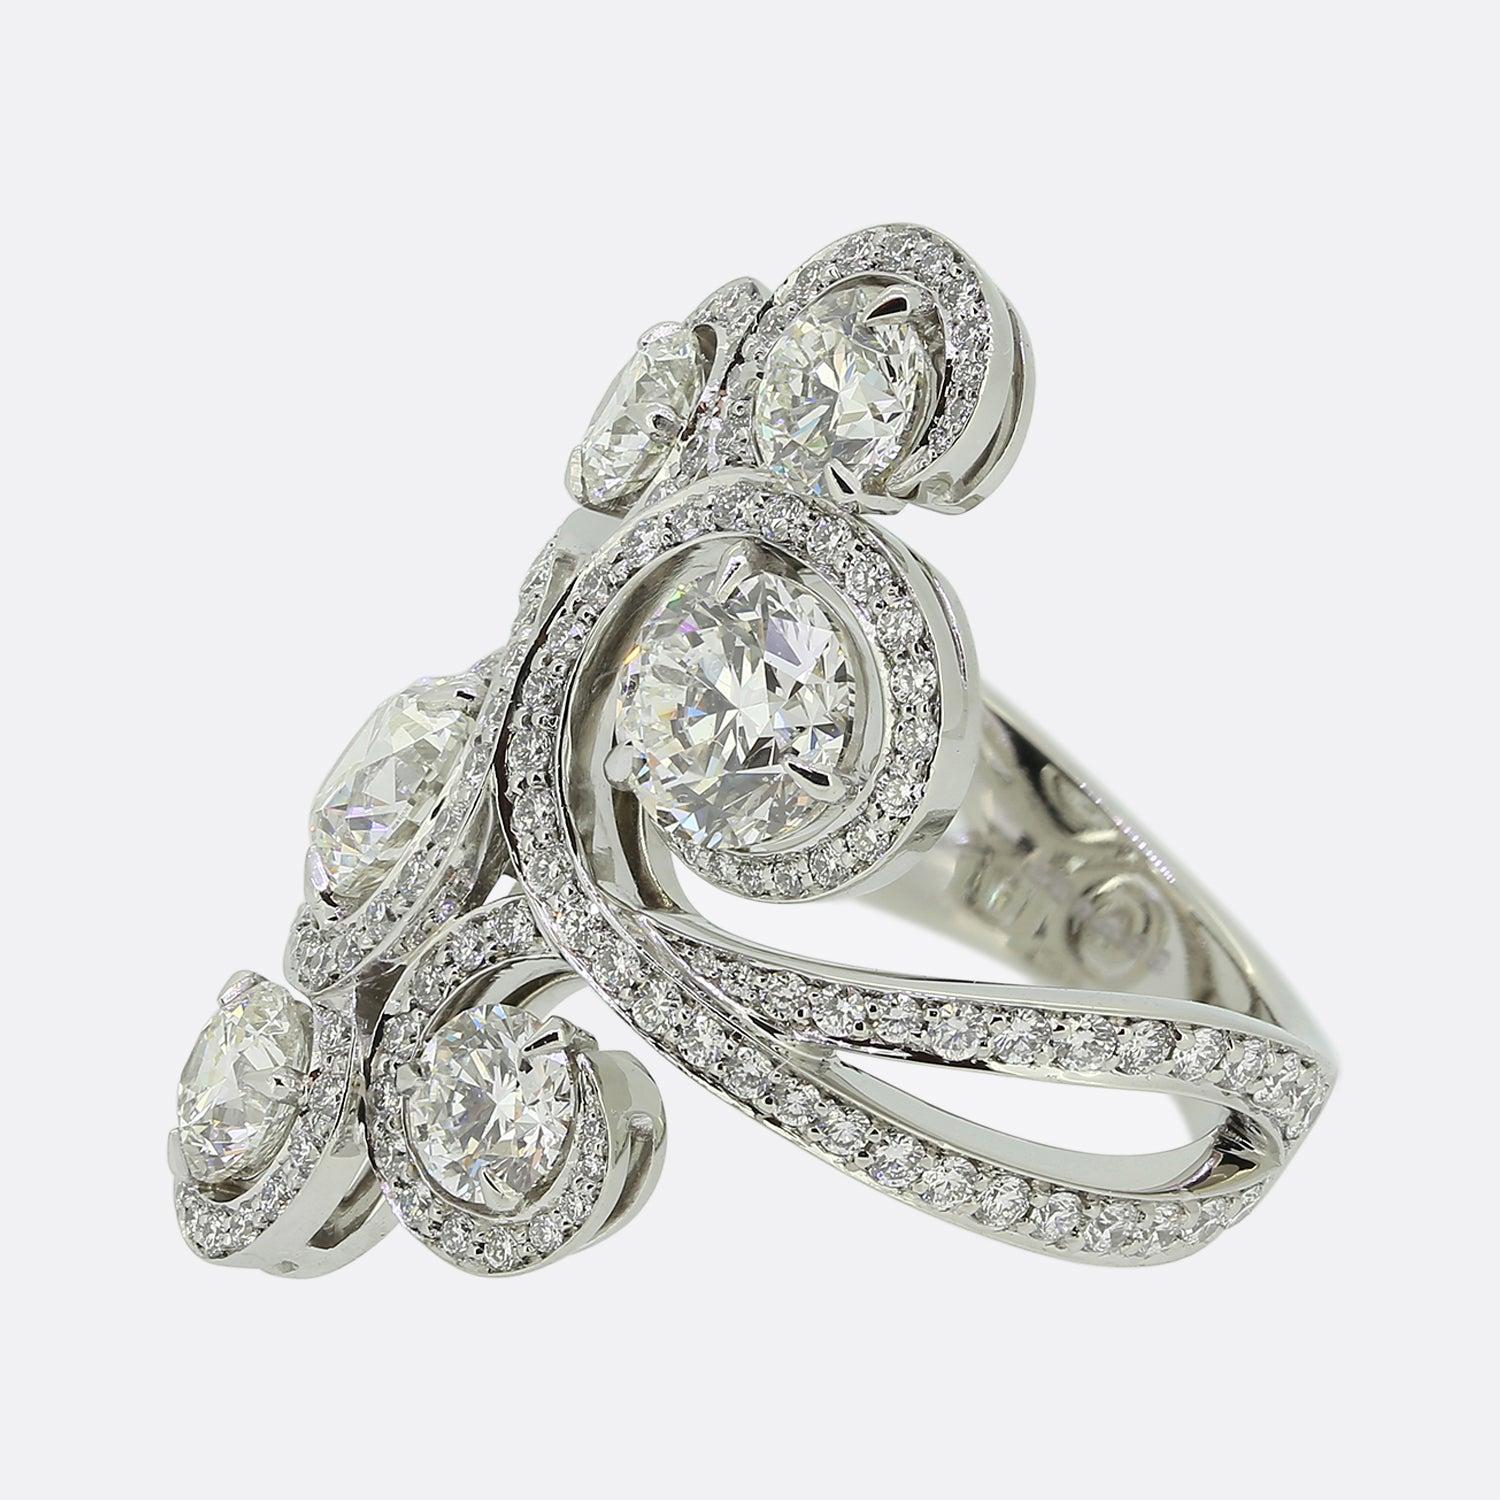 Here we have a beautifully crafted diamond ring from the world renowned luxury jewellery designer, Boodles. The ring features over 4 carats of round brilliant cut diamonds that are perfectly matched for colour and clarity. The two largest diamonds